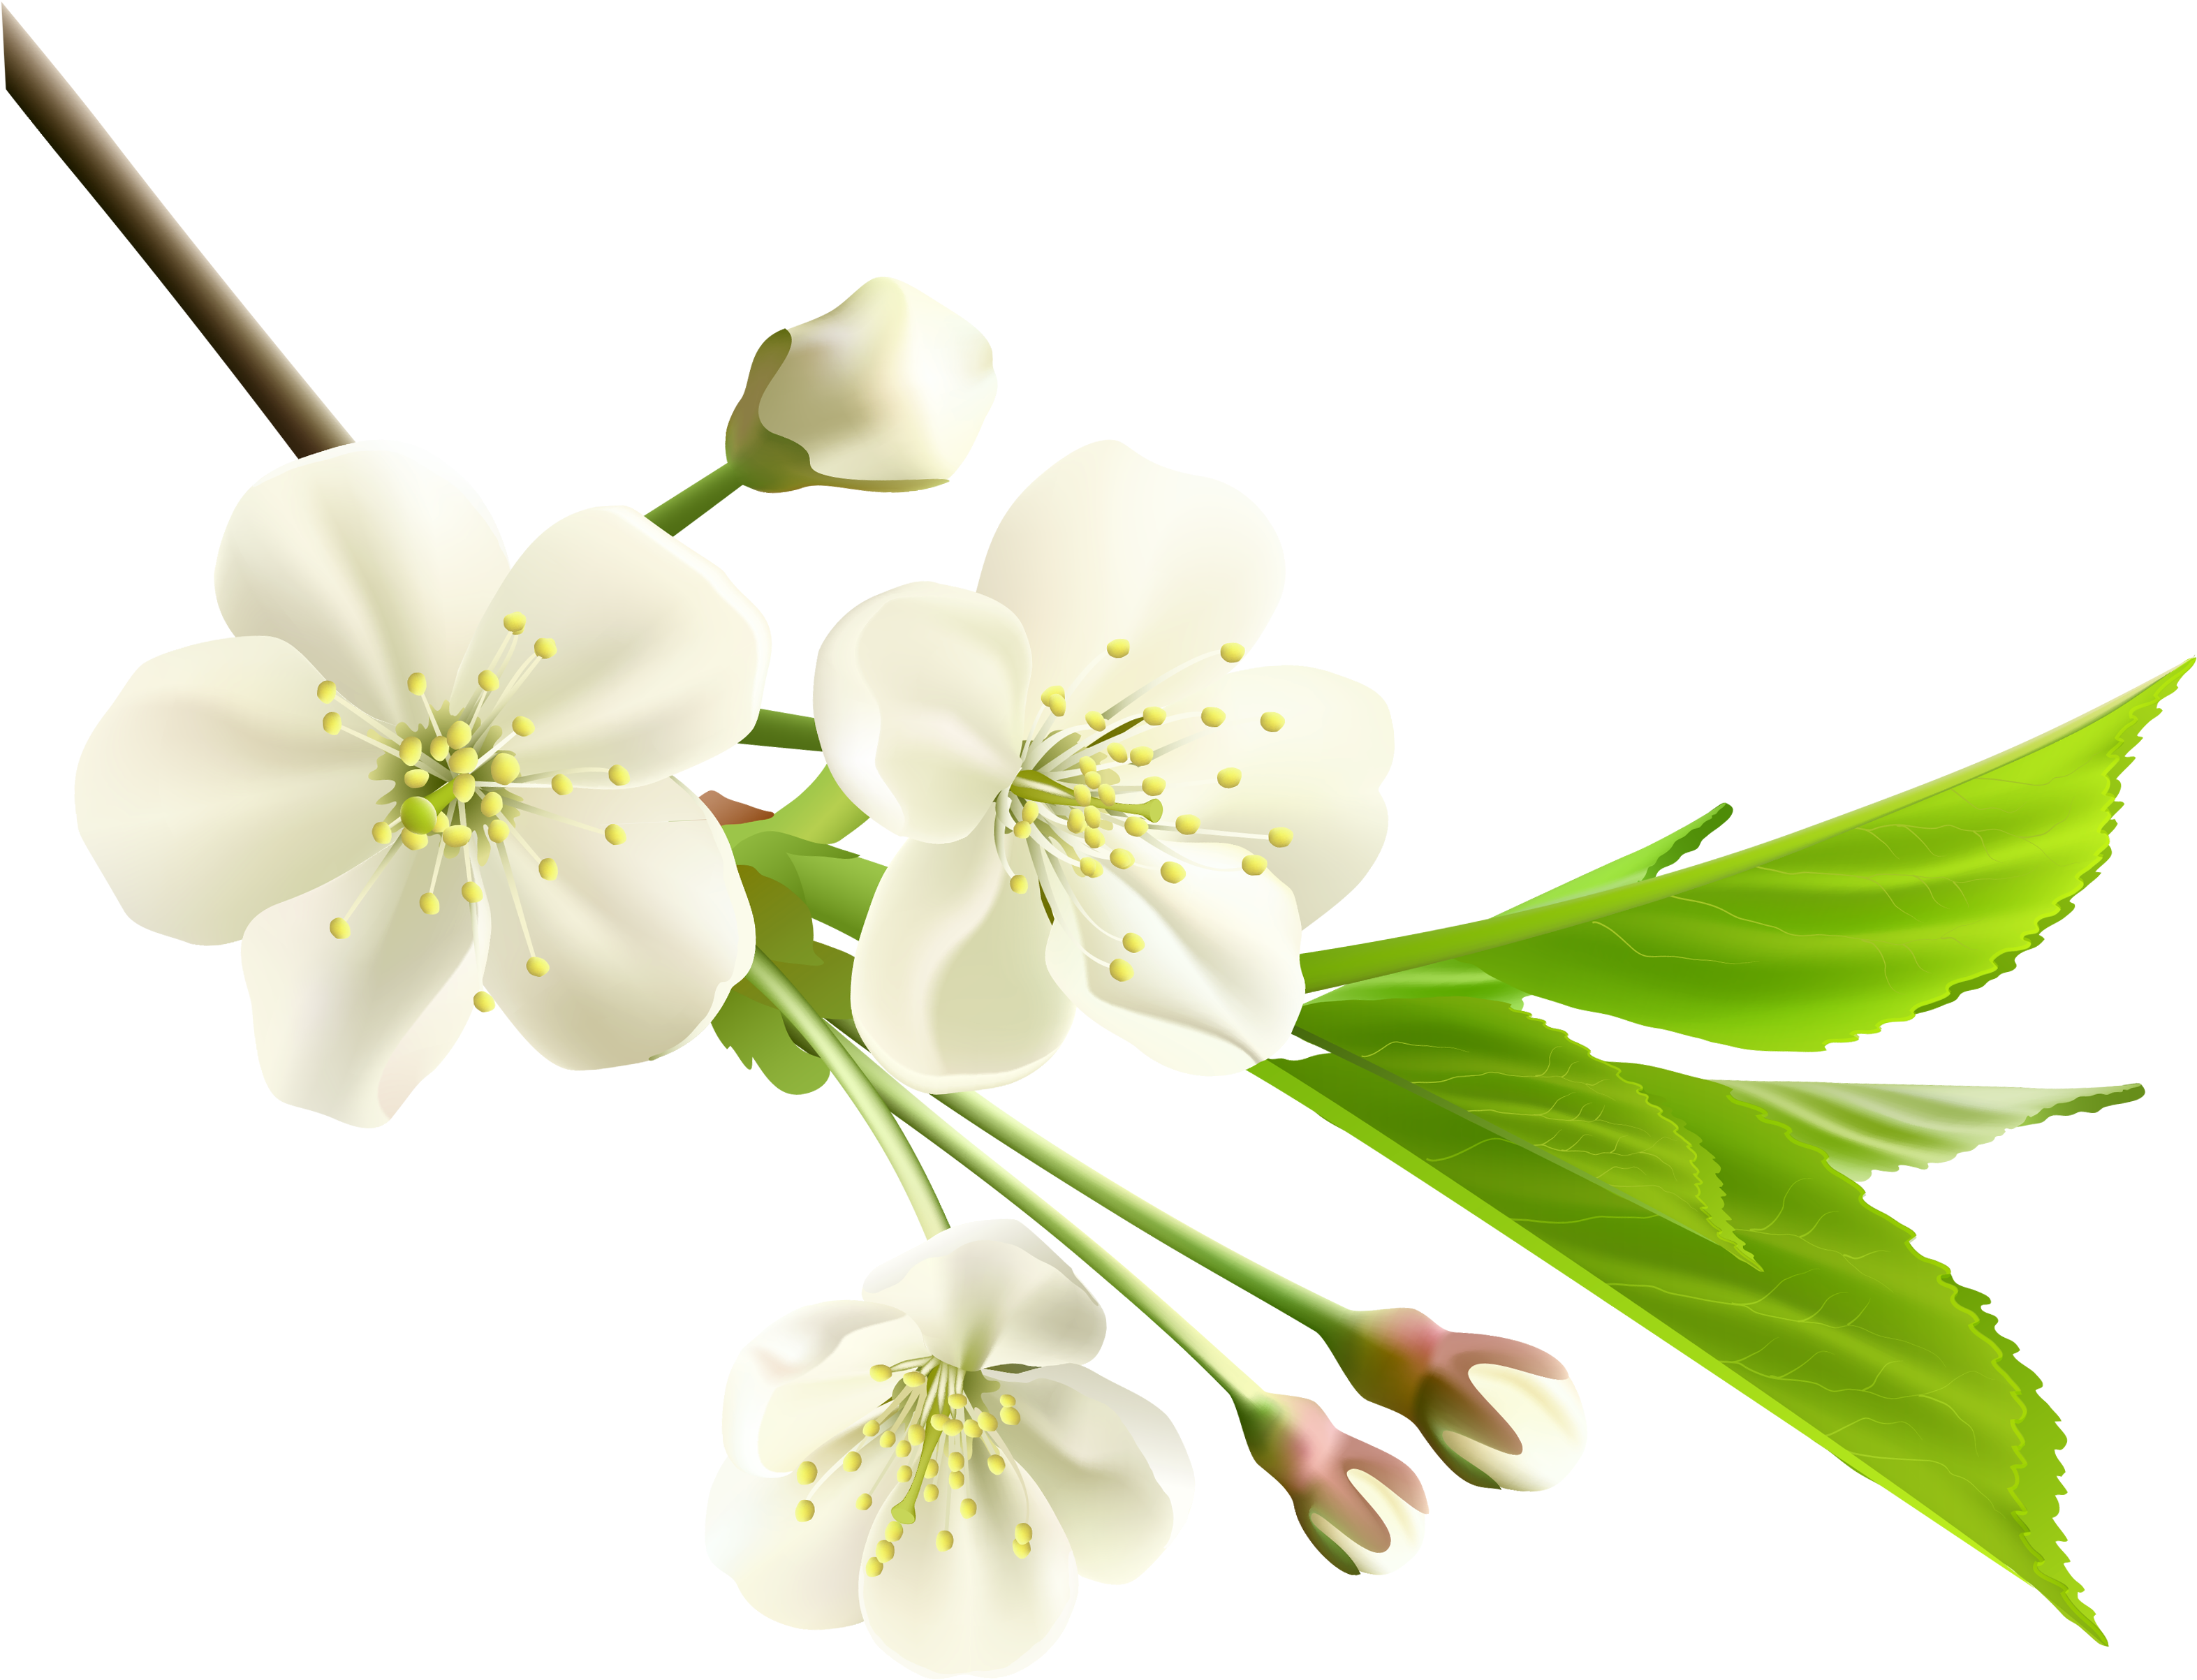 Spring Branch With White Tree Flowers Png Clipart - White Cherry Blossom Pn...